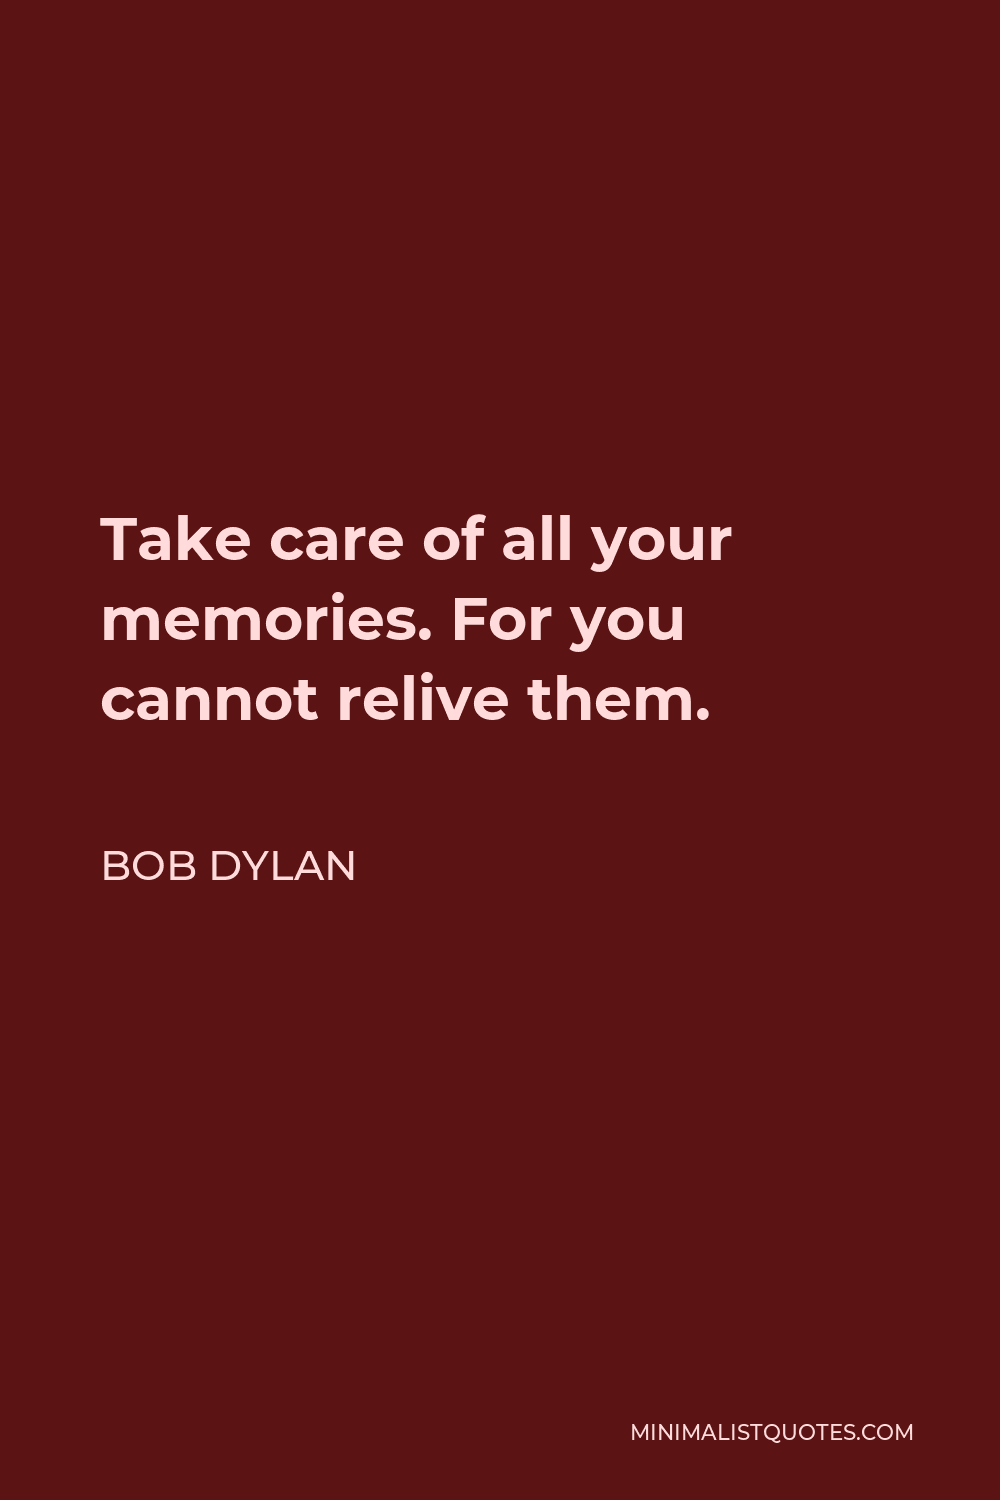 Bob Dylan Quote - Take care of all your memories. For you cannot relive them.